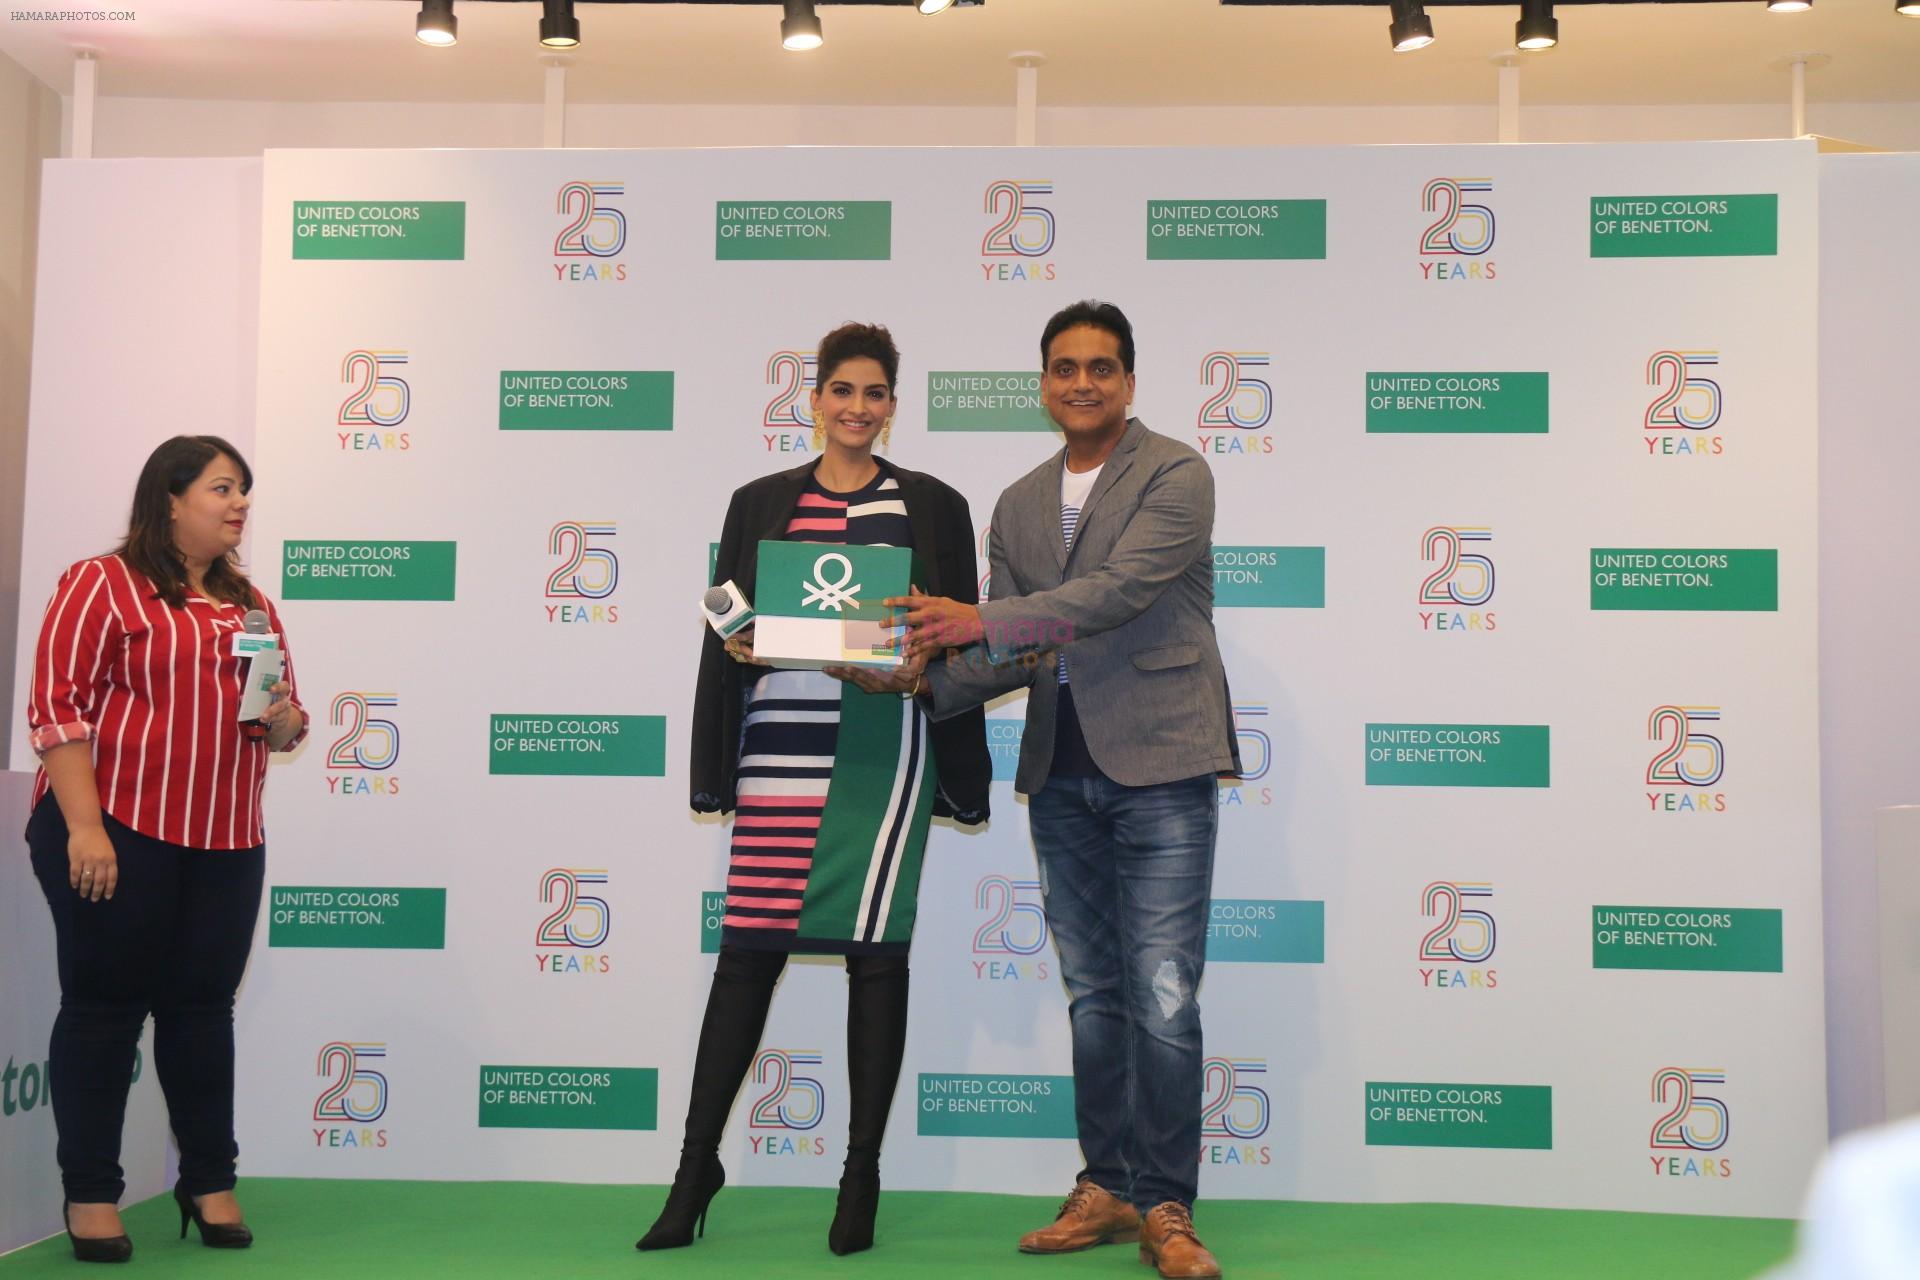 Sonam Kapoor During The 25 Years Celebration Of Benetton India Of Heritage And Values In India At United Colors Of Benetton